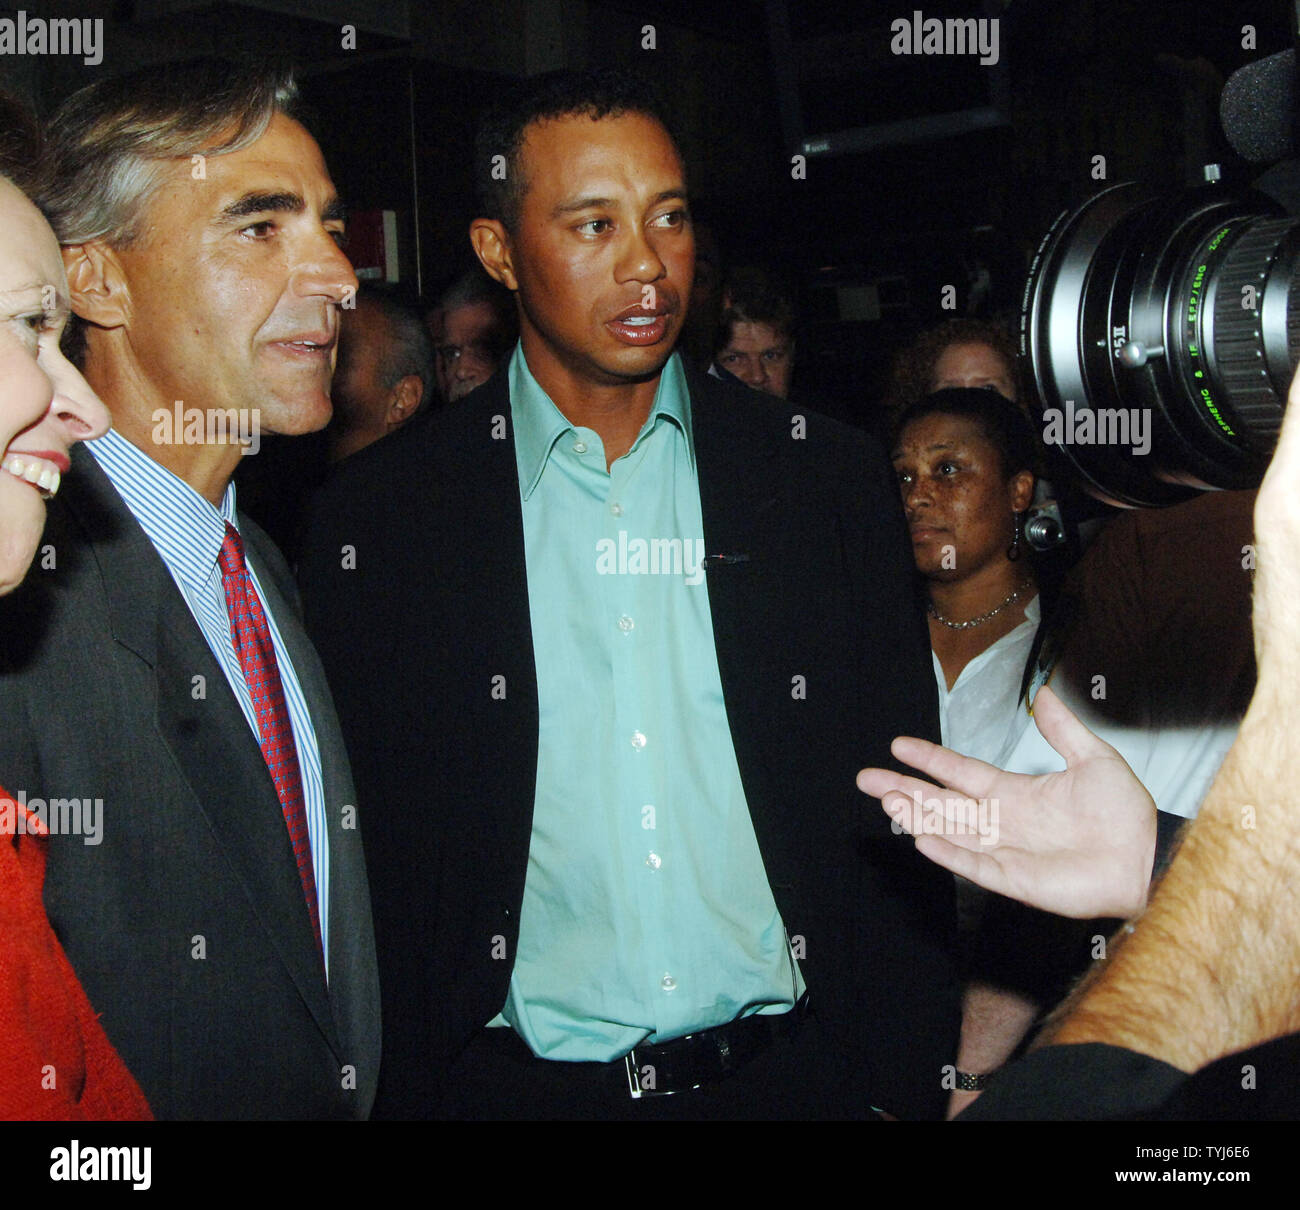 Deutsche Bank Americas CEO Seth Waugh (L) and golf pro Tiger Woods take  part in the ceremonial opening bell ceremonies at the New York Stock  Exchange on August 28, 2007, to kick